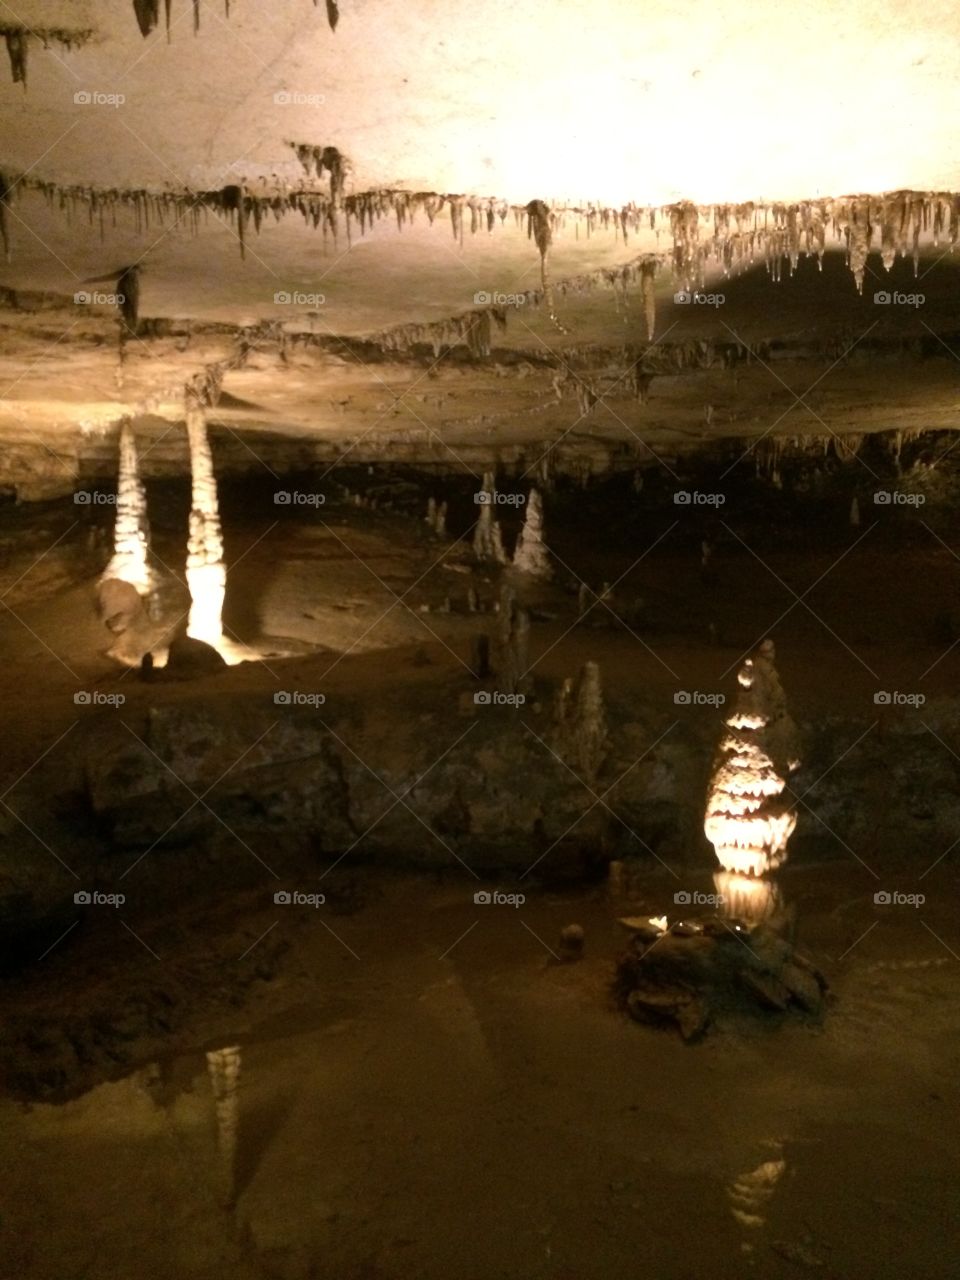 Inside a cave in Indiana